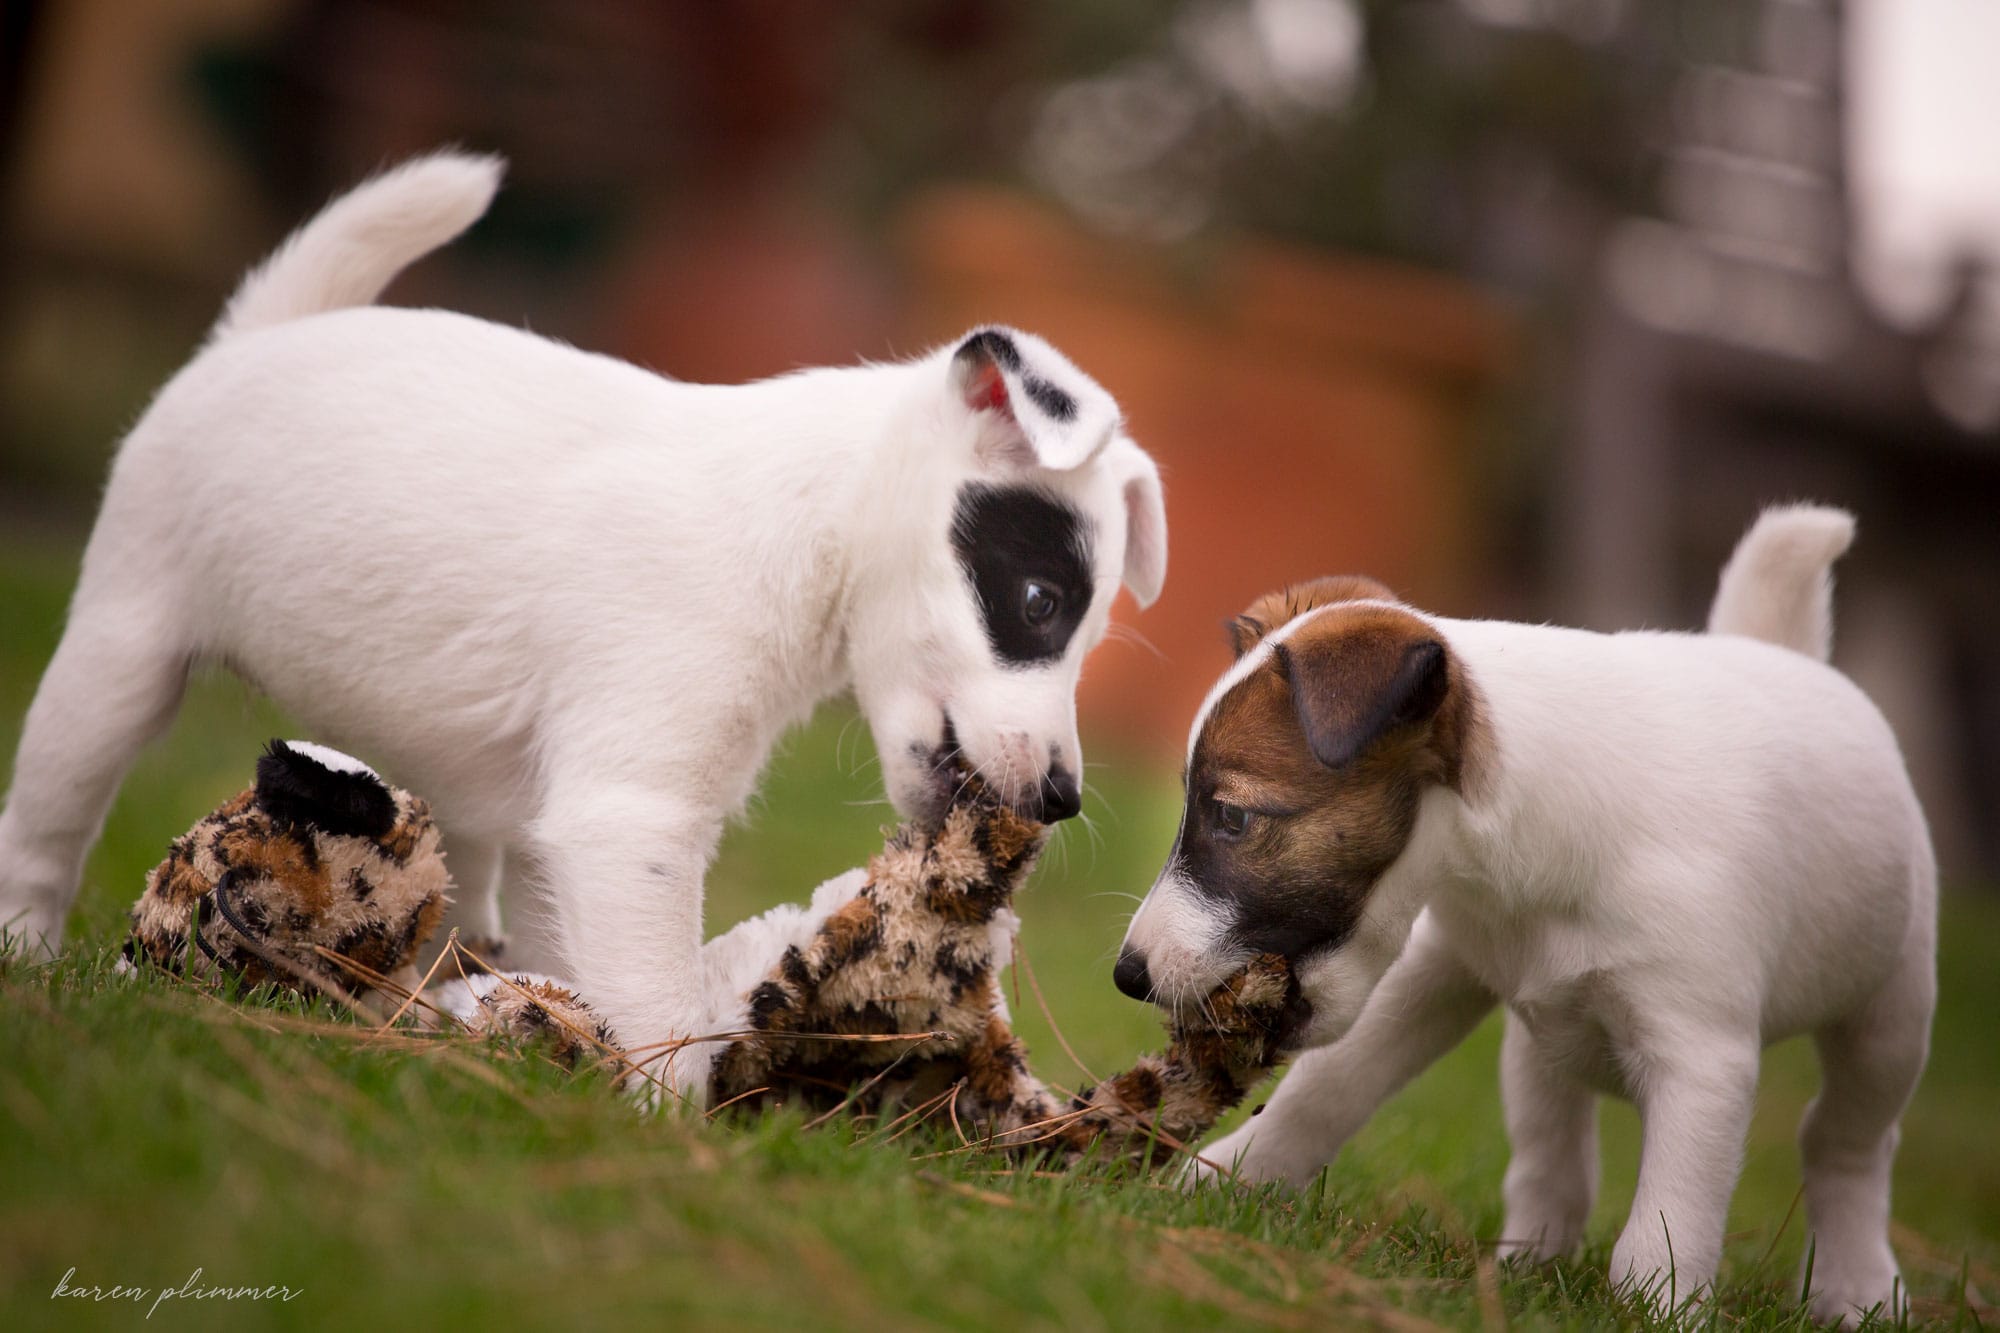 Smooth fox terrier baby puppies tearing apart a leopard toy